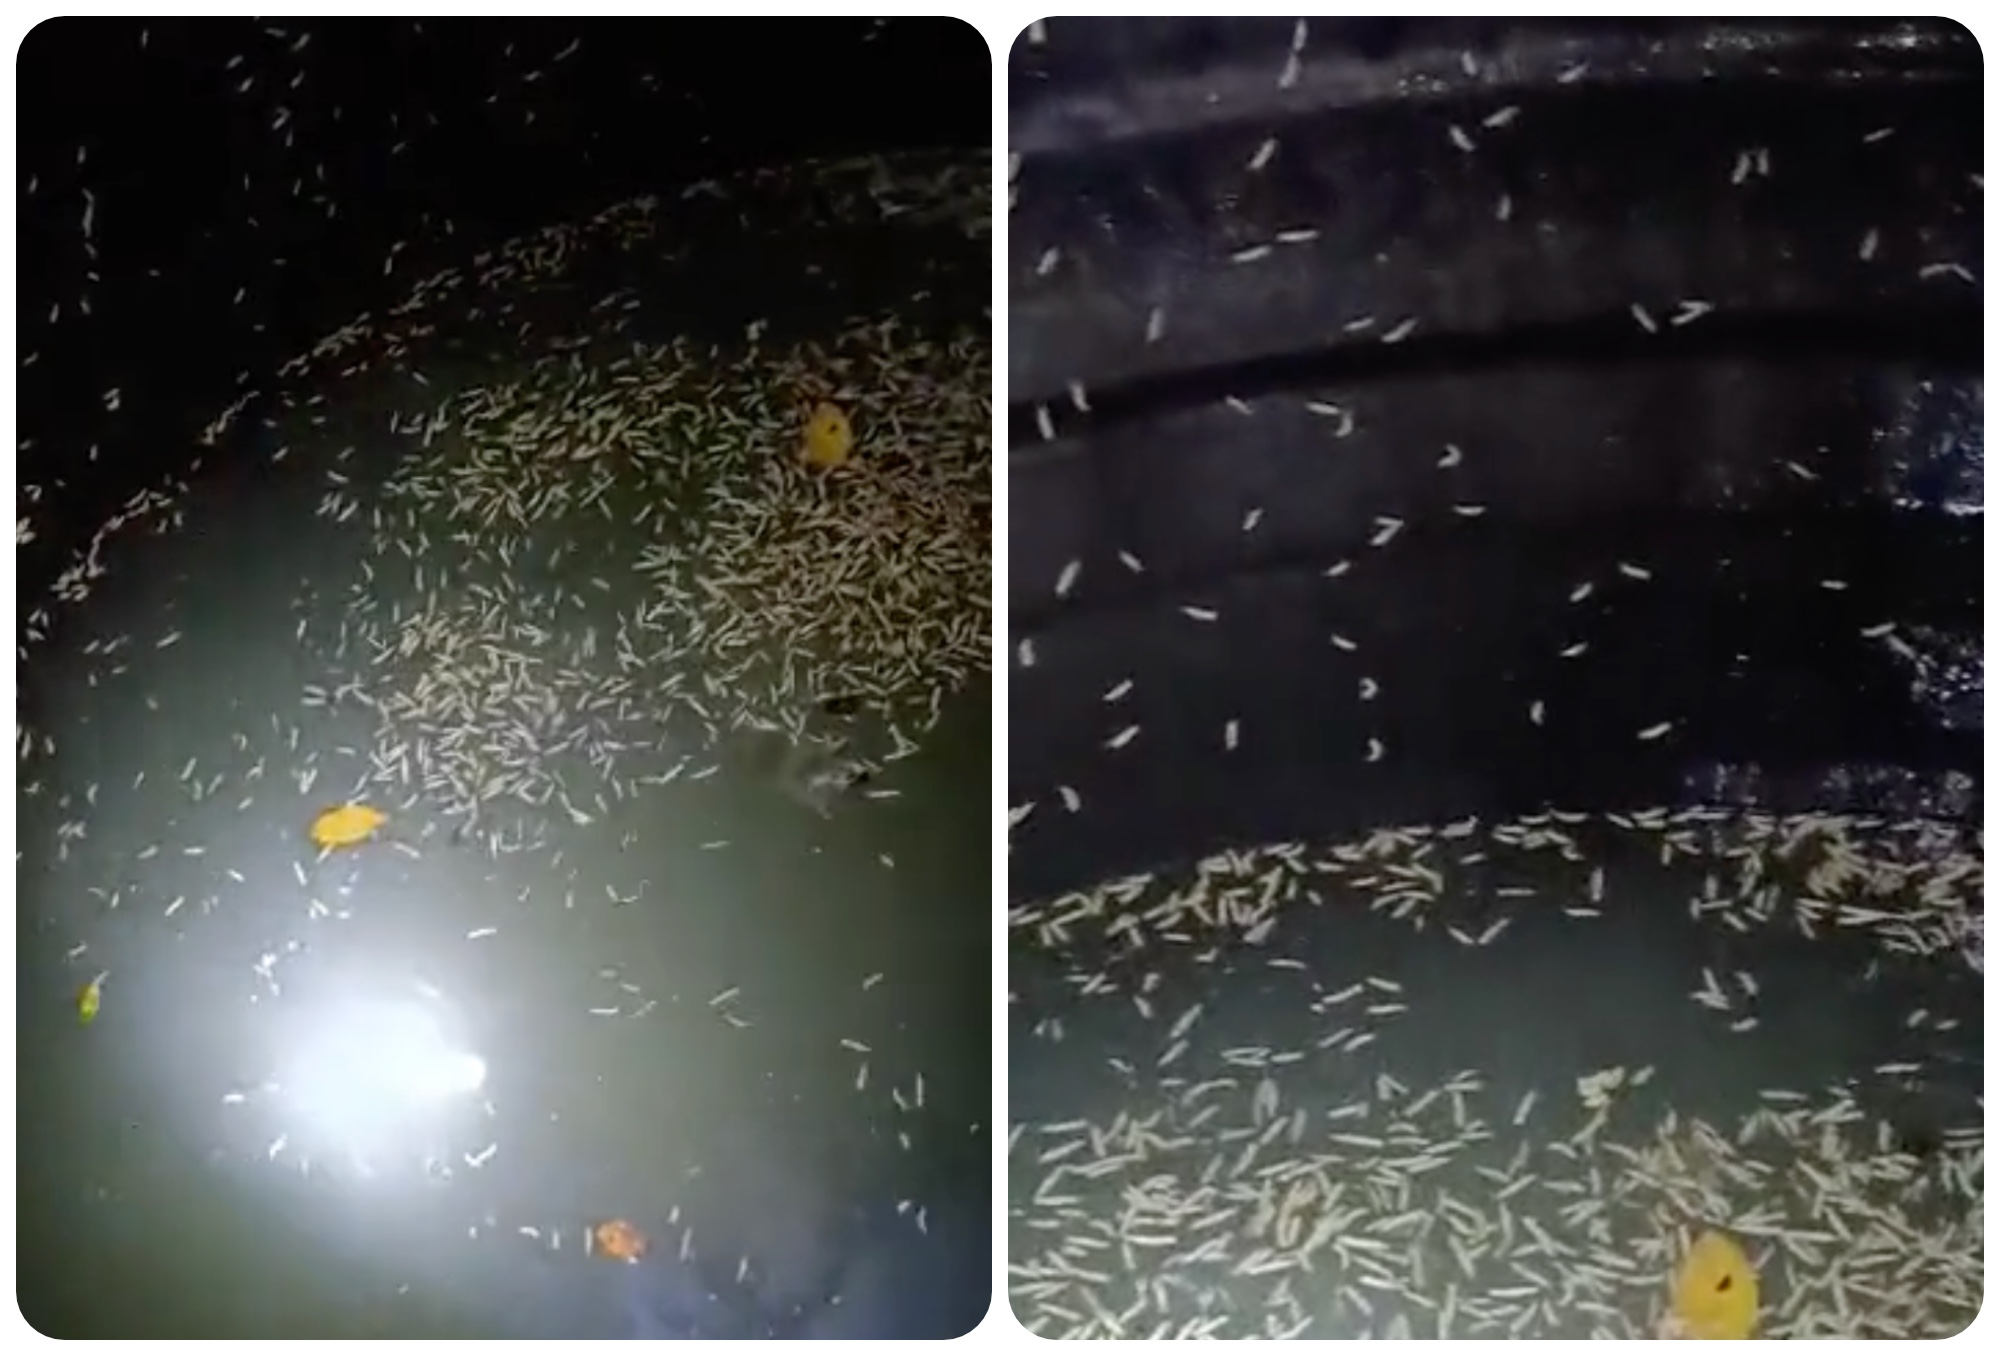 UMS confirms maggot infested water tank at student campus after viral TikTok video